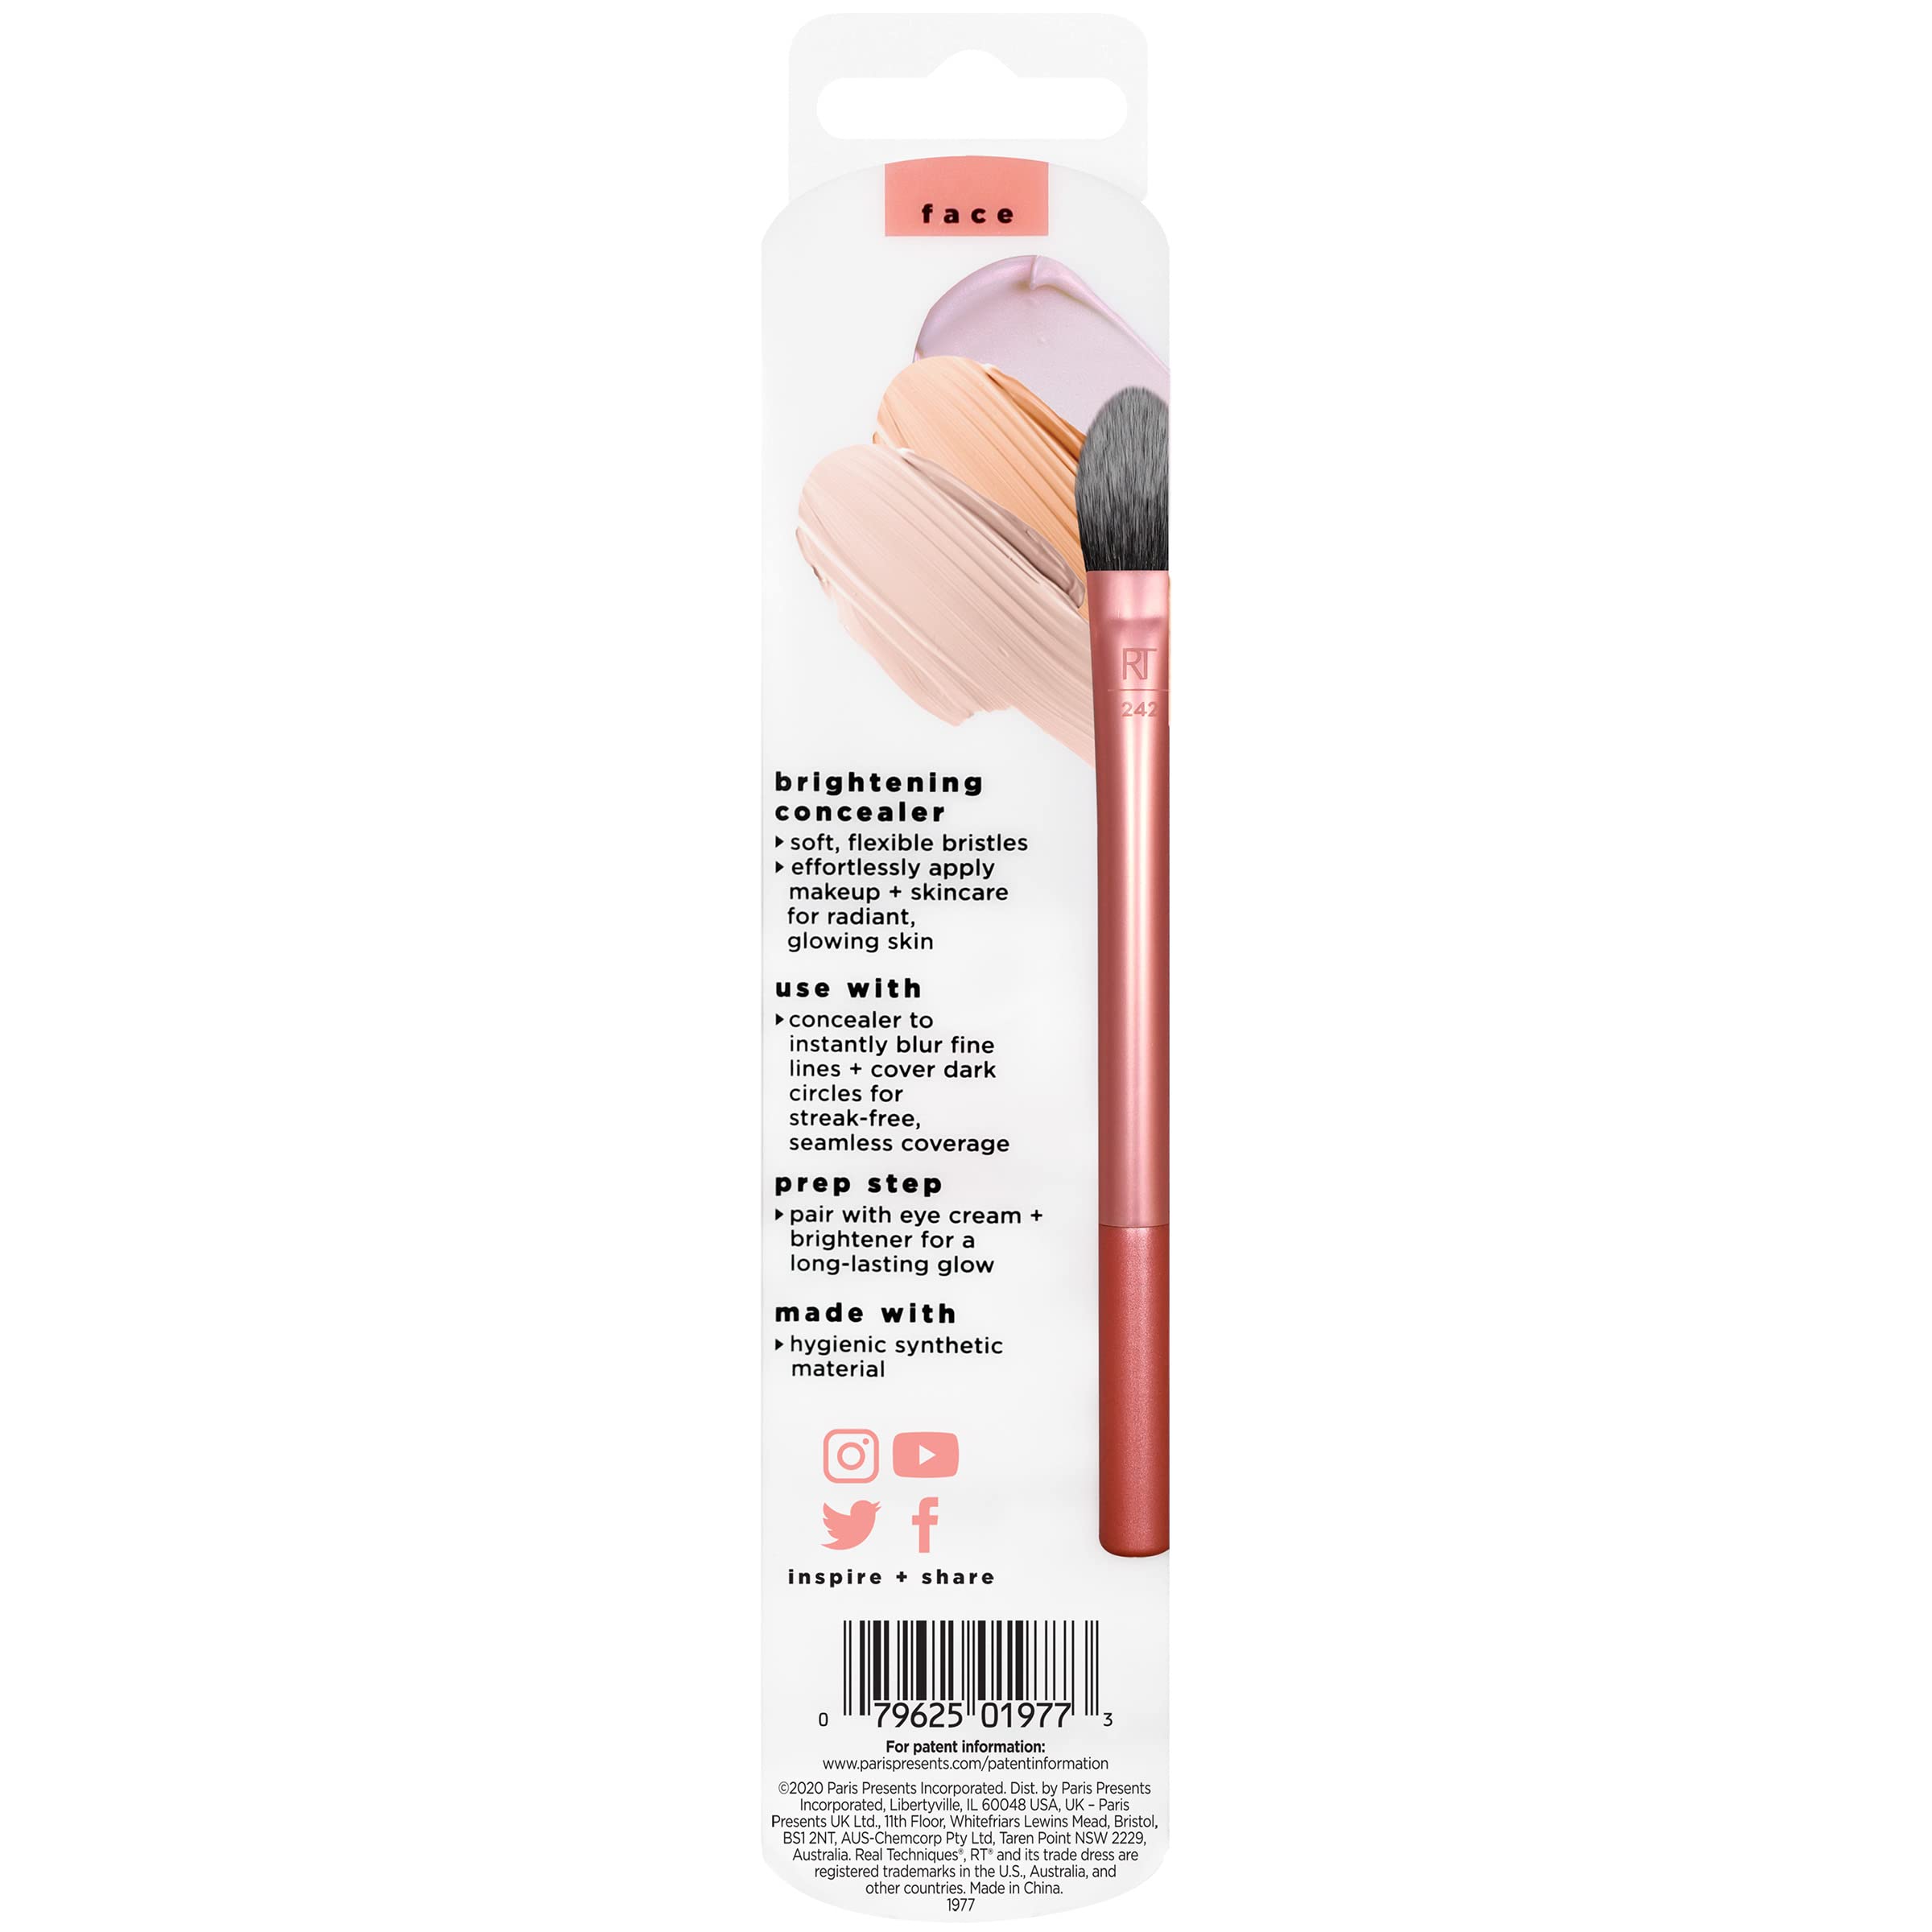 Real Techniques Brightening Concealer Makeup Brush, Kitten Paw Brush For Under Eyes, Face Brush For Eye Cream & Concealer, Covers Blemishes, Imperfections, & Dark Circles, RT 242 Brush, 1 Count